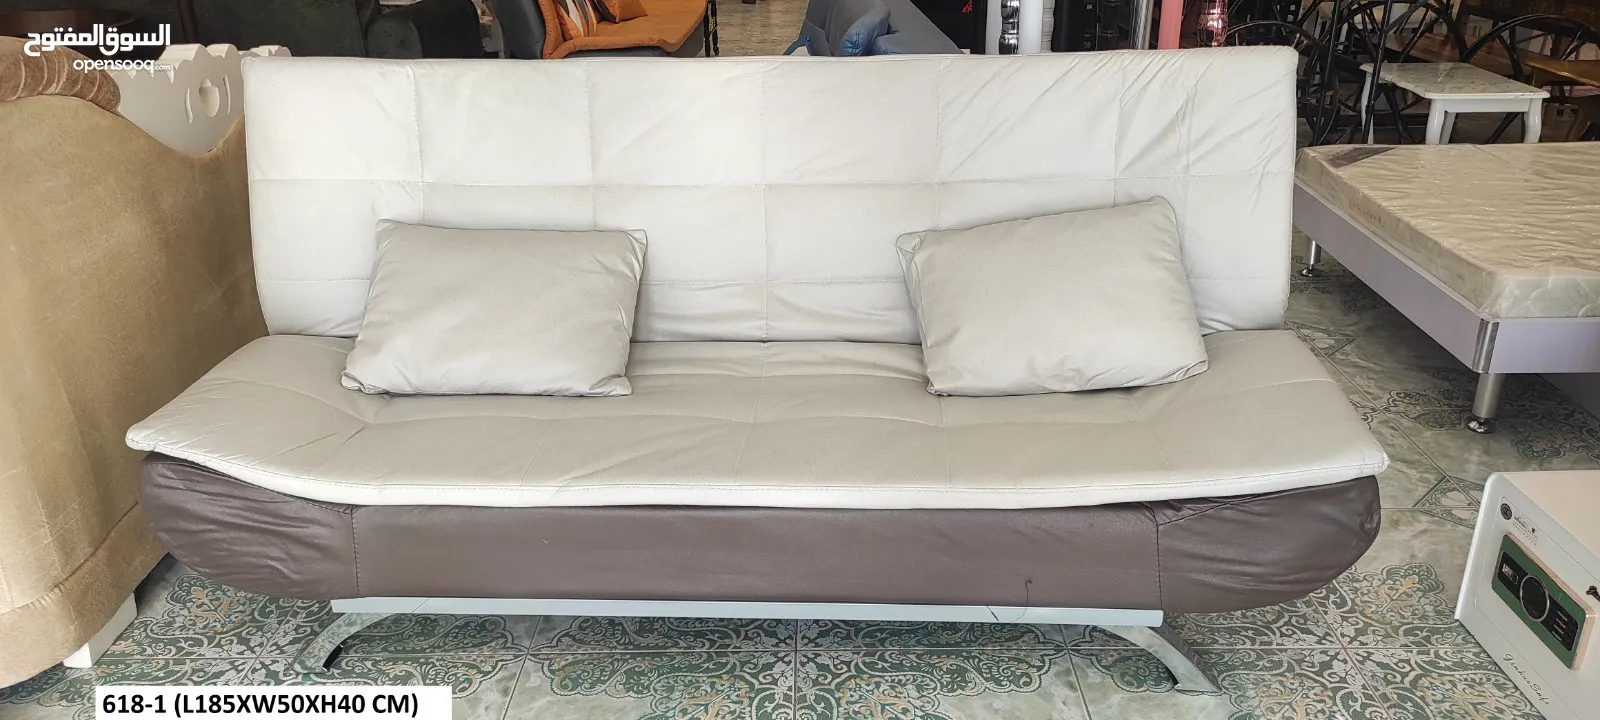 Sofa Bed New 3  Seater